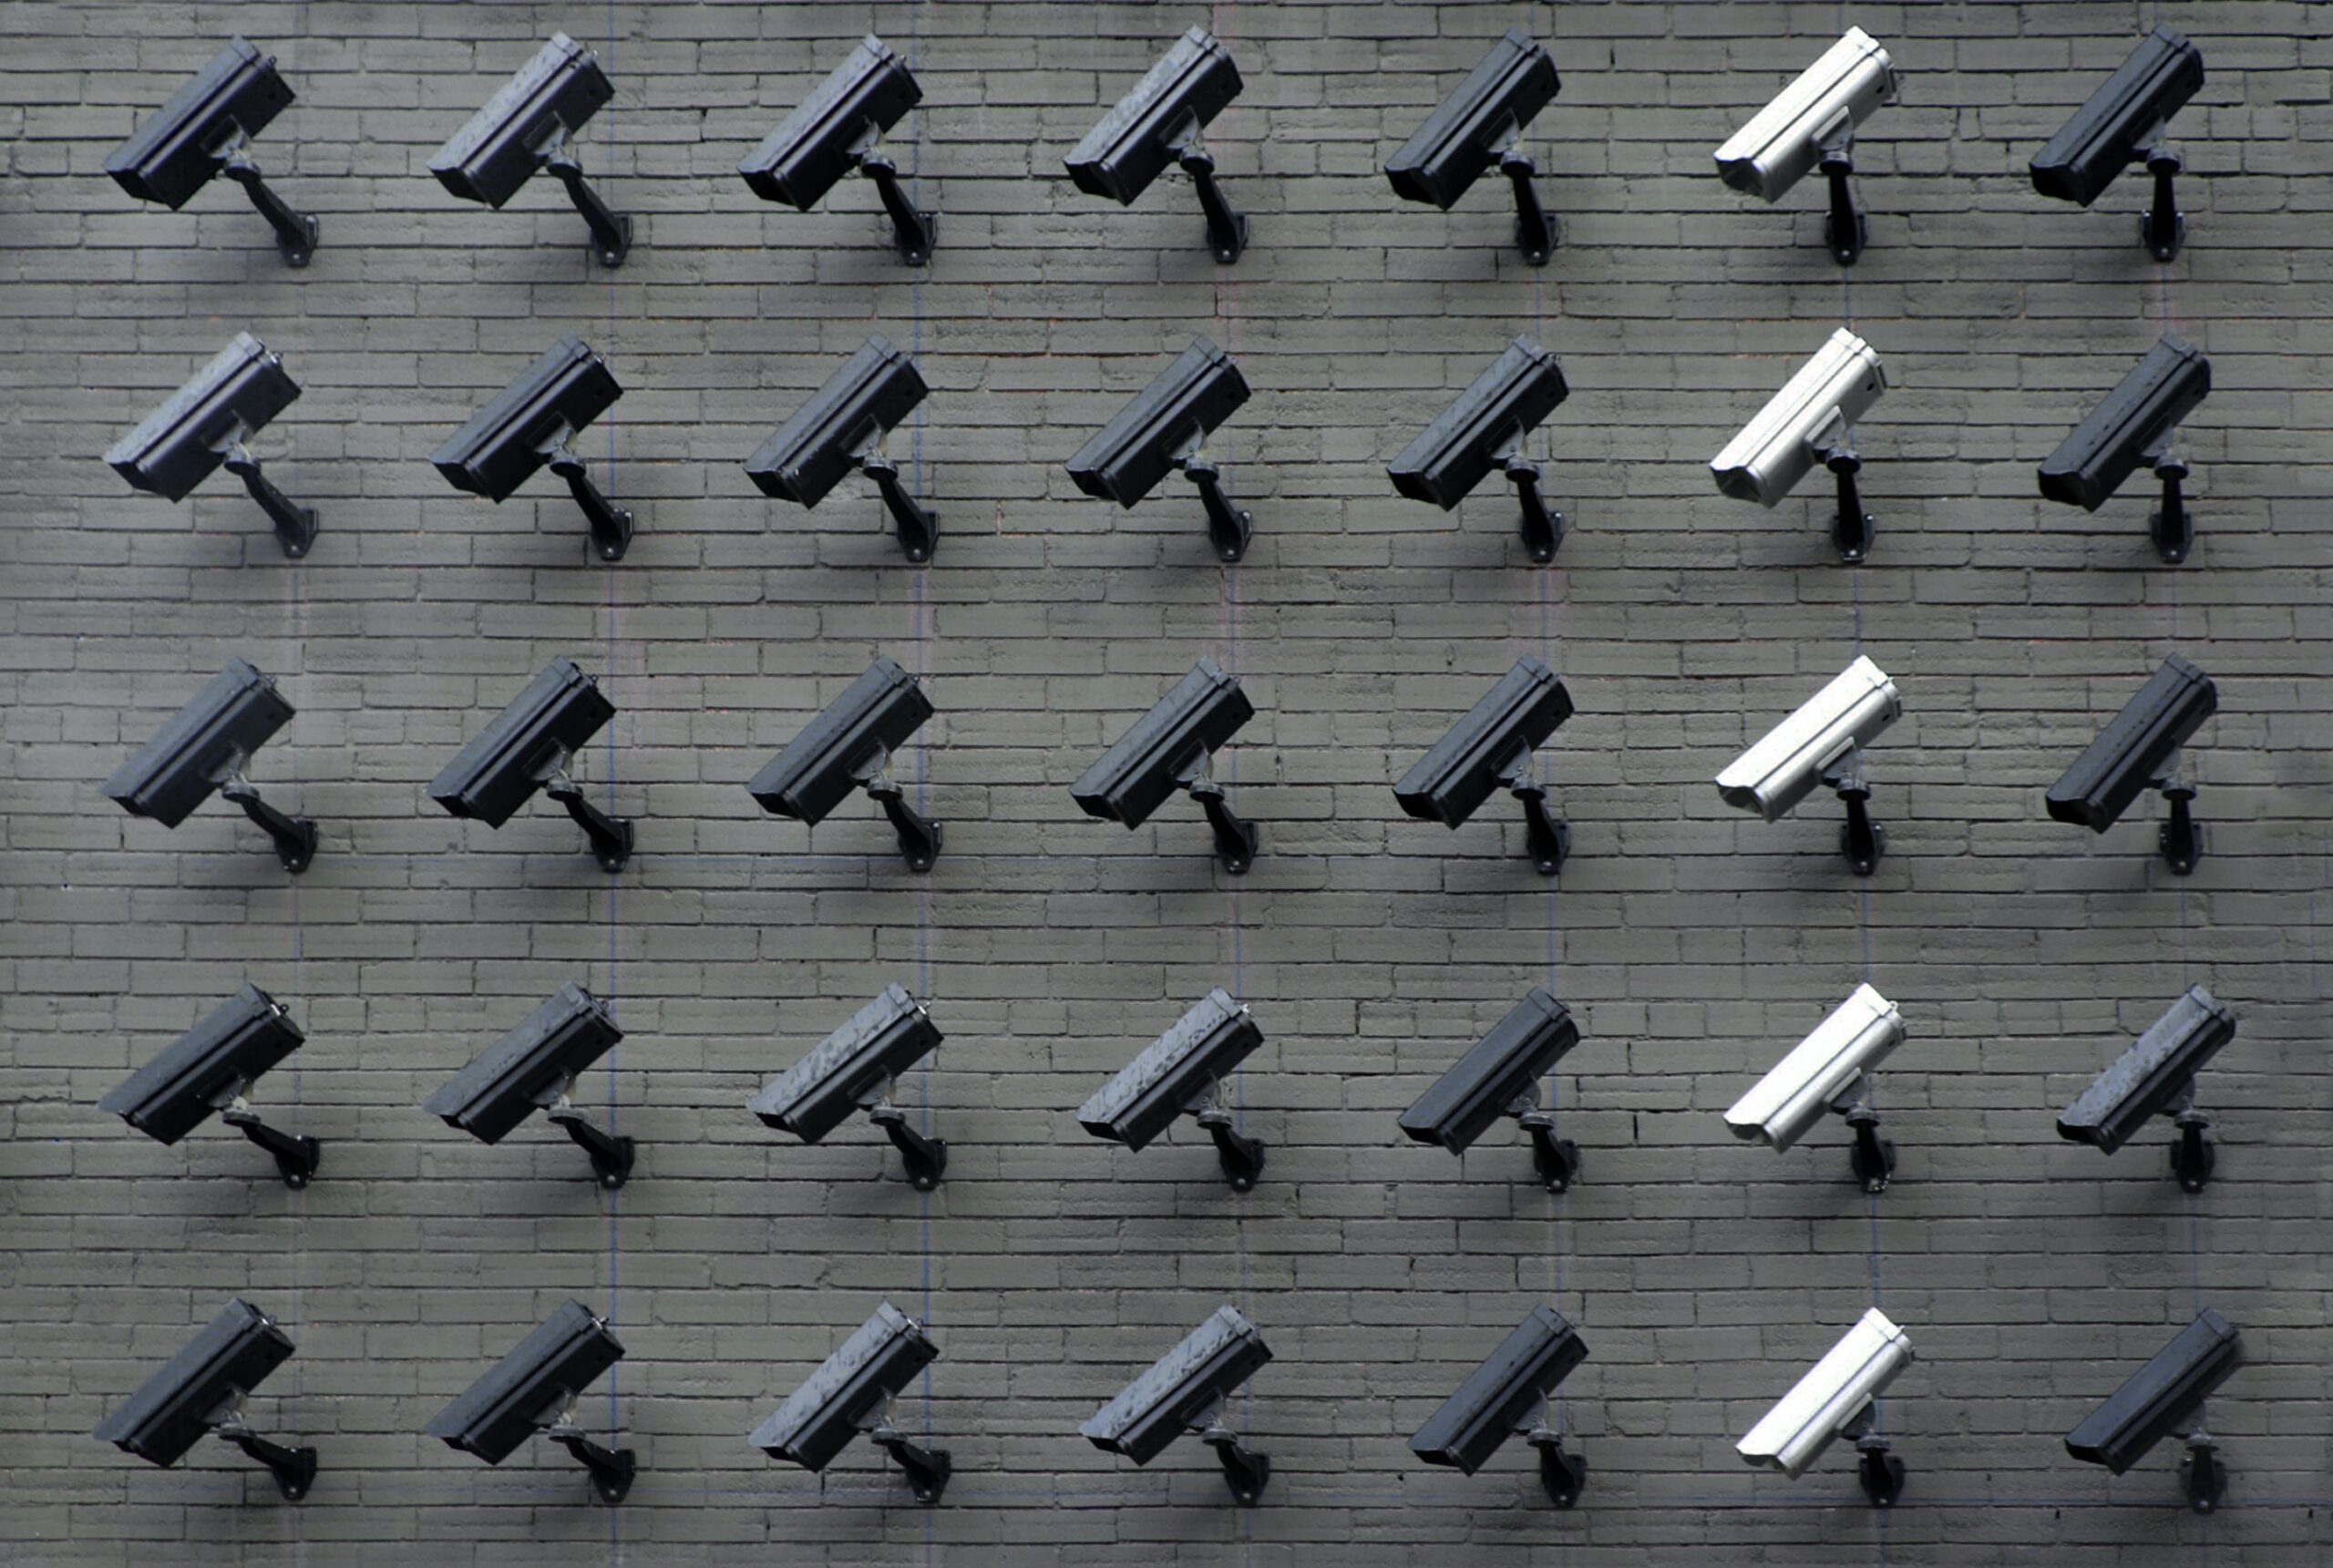 Surveillance cameras used for physical security investigations